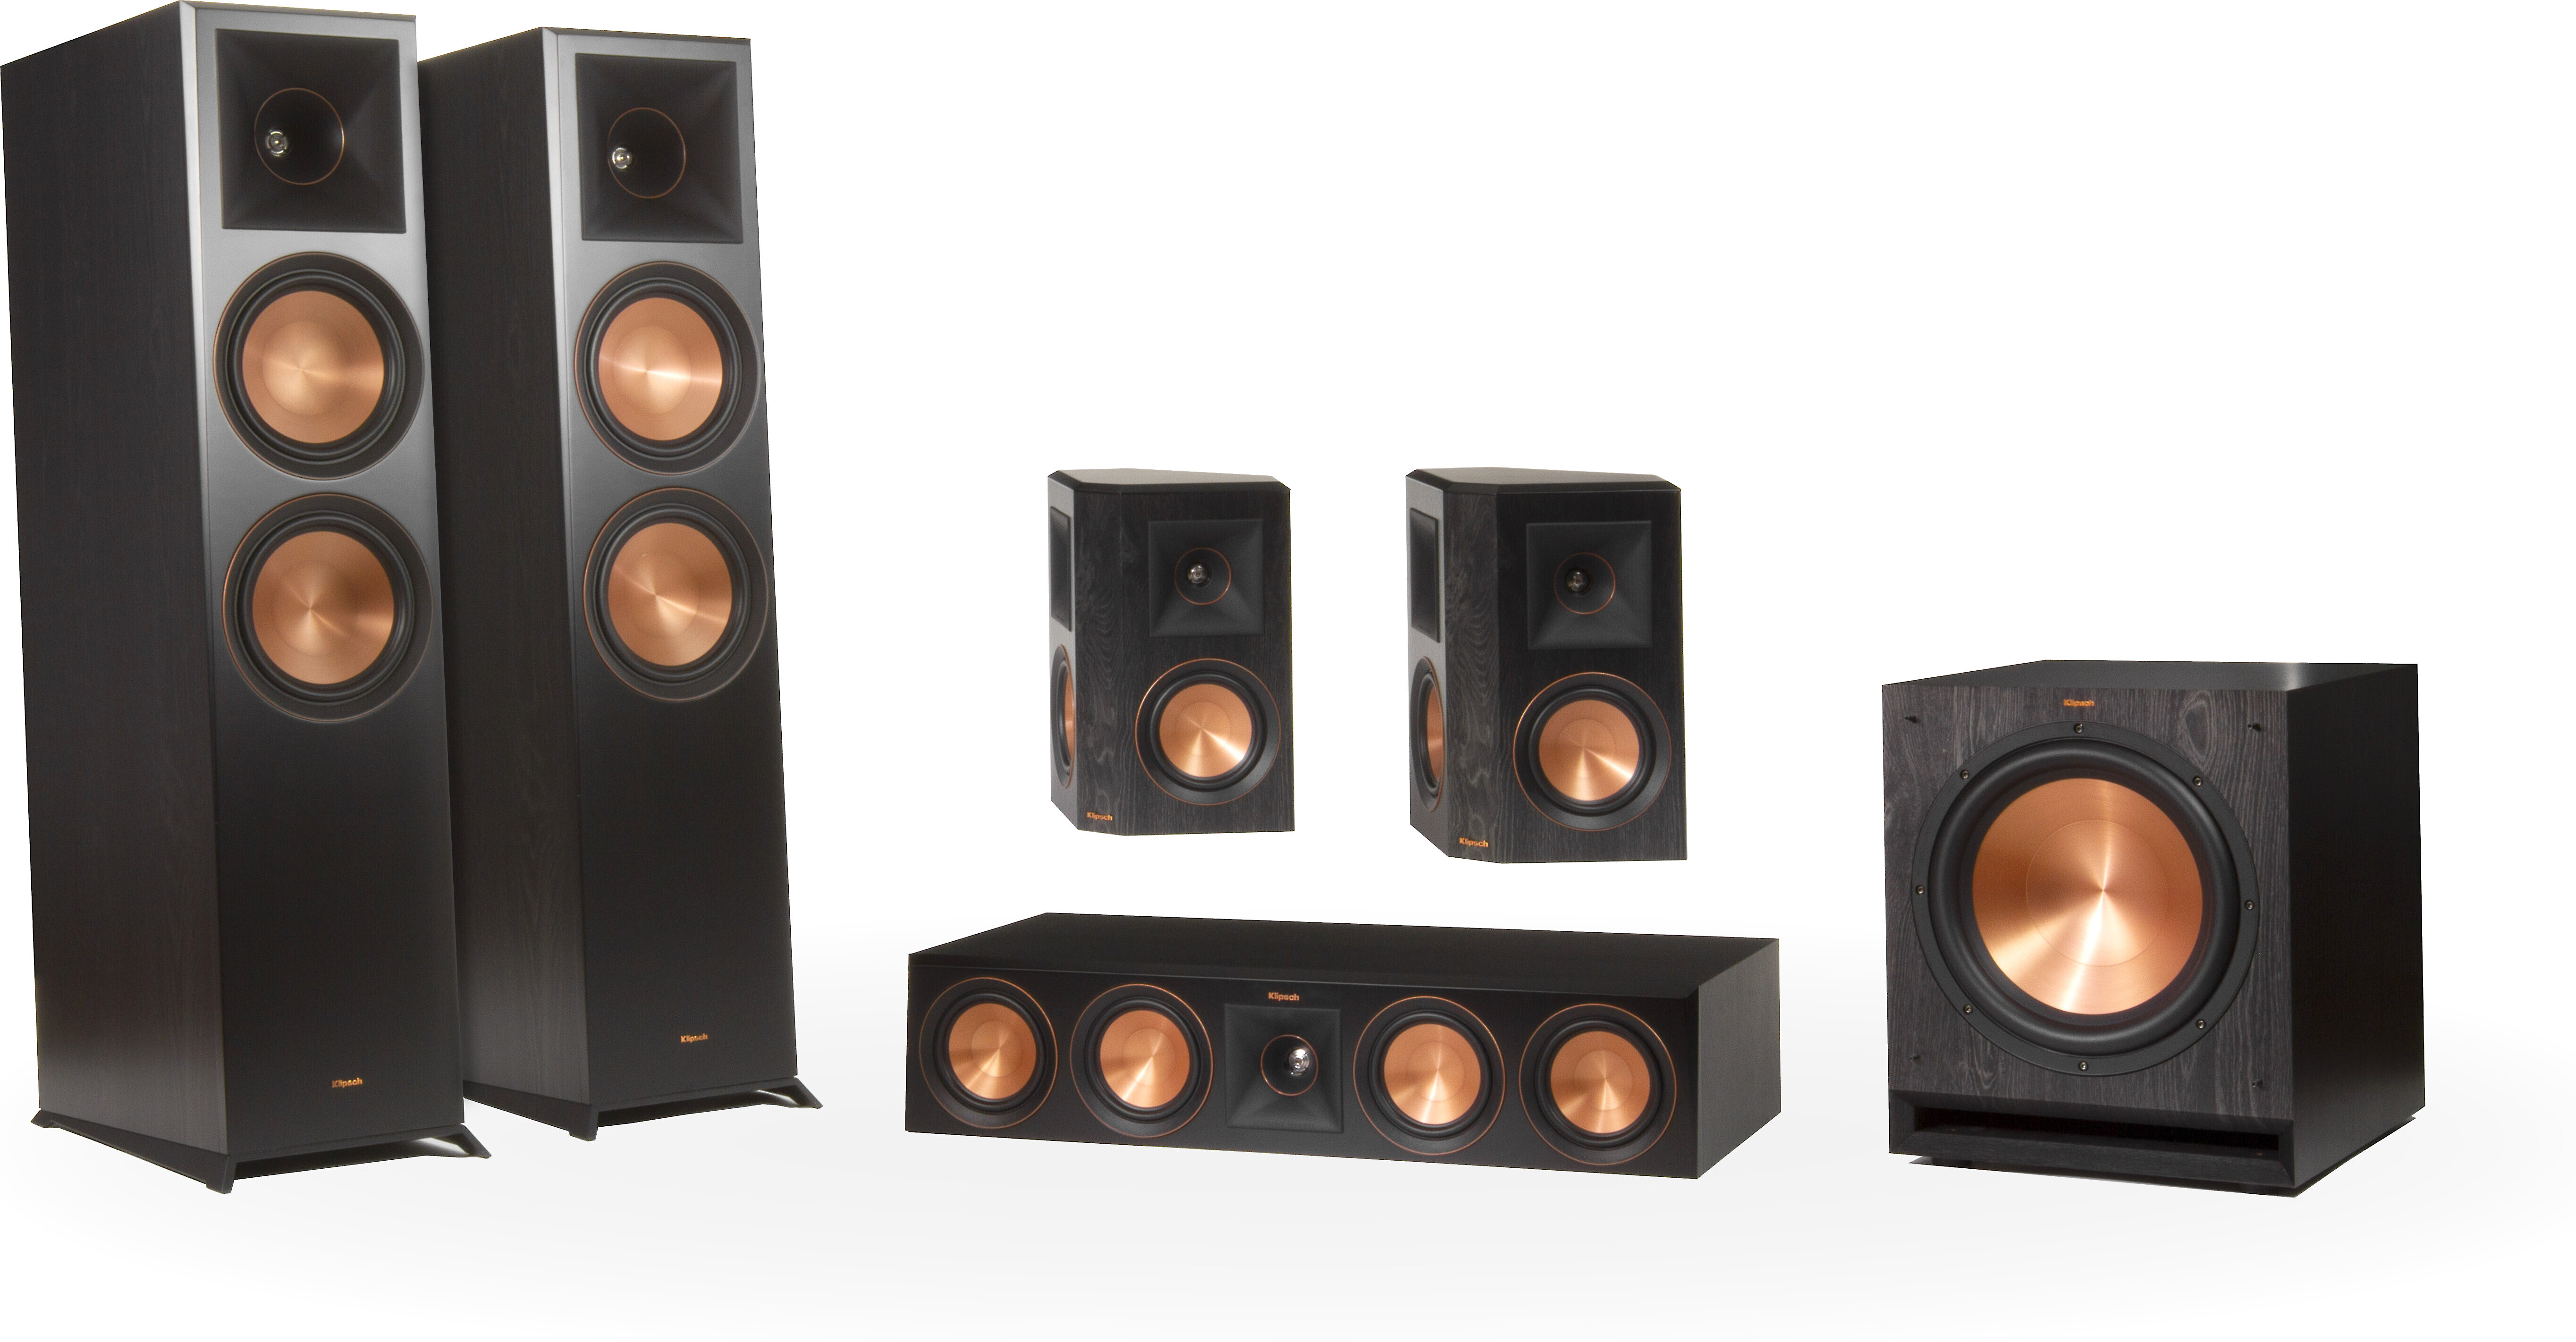 Klipsch Rp-500sa Walnut. Klipsch r-41sa. 360 Spatial Sound Mapping Dolby Atmos® / DTS:X® Home Theater System | HT-a9. Top Speakers in Theatre. Bbk home theatre